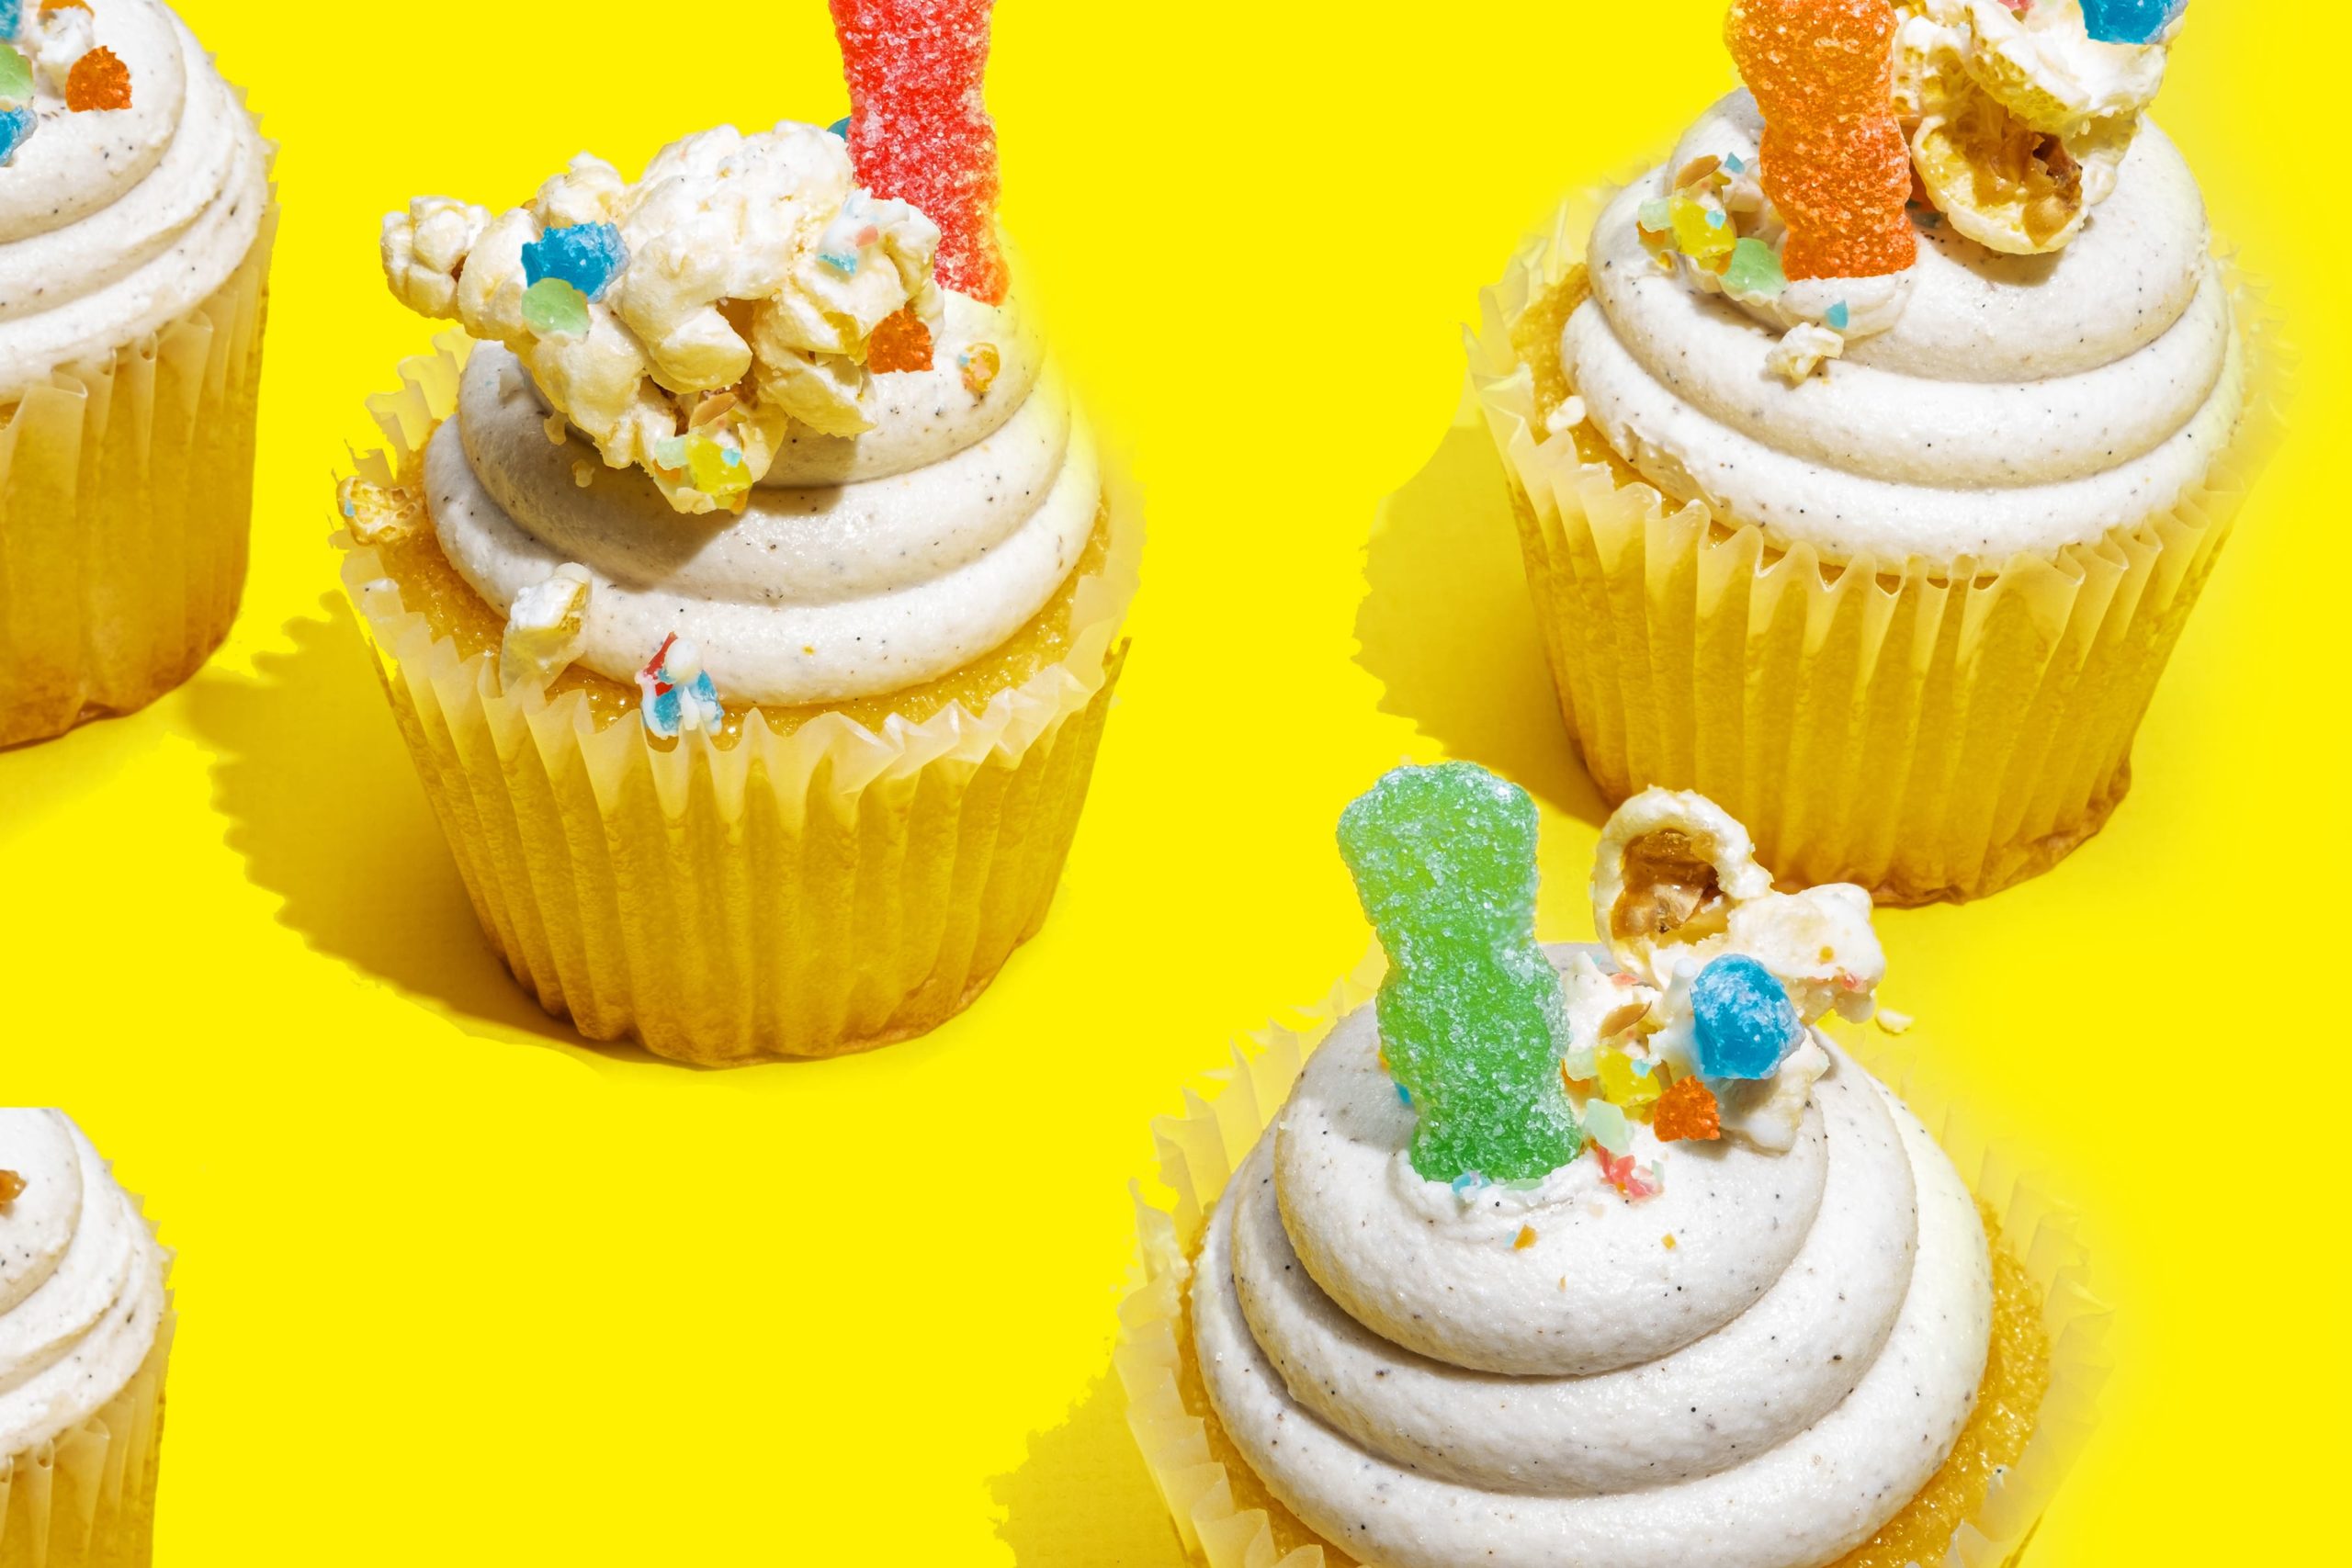 Extra Sour Candy Pop Sour Patch Kids Cupcakes